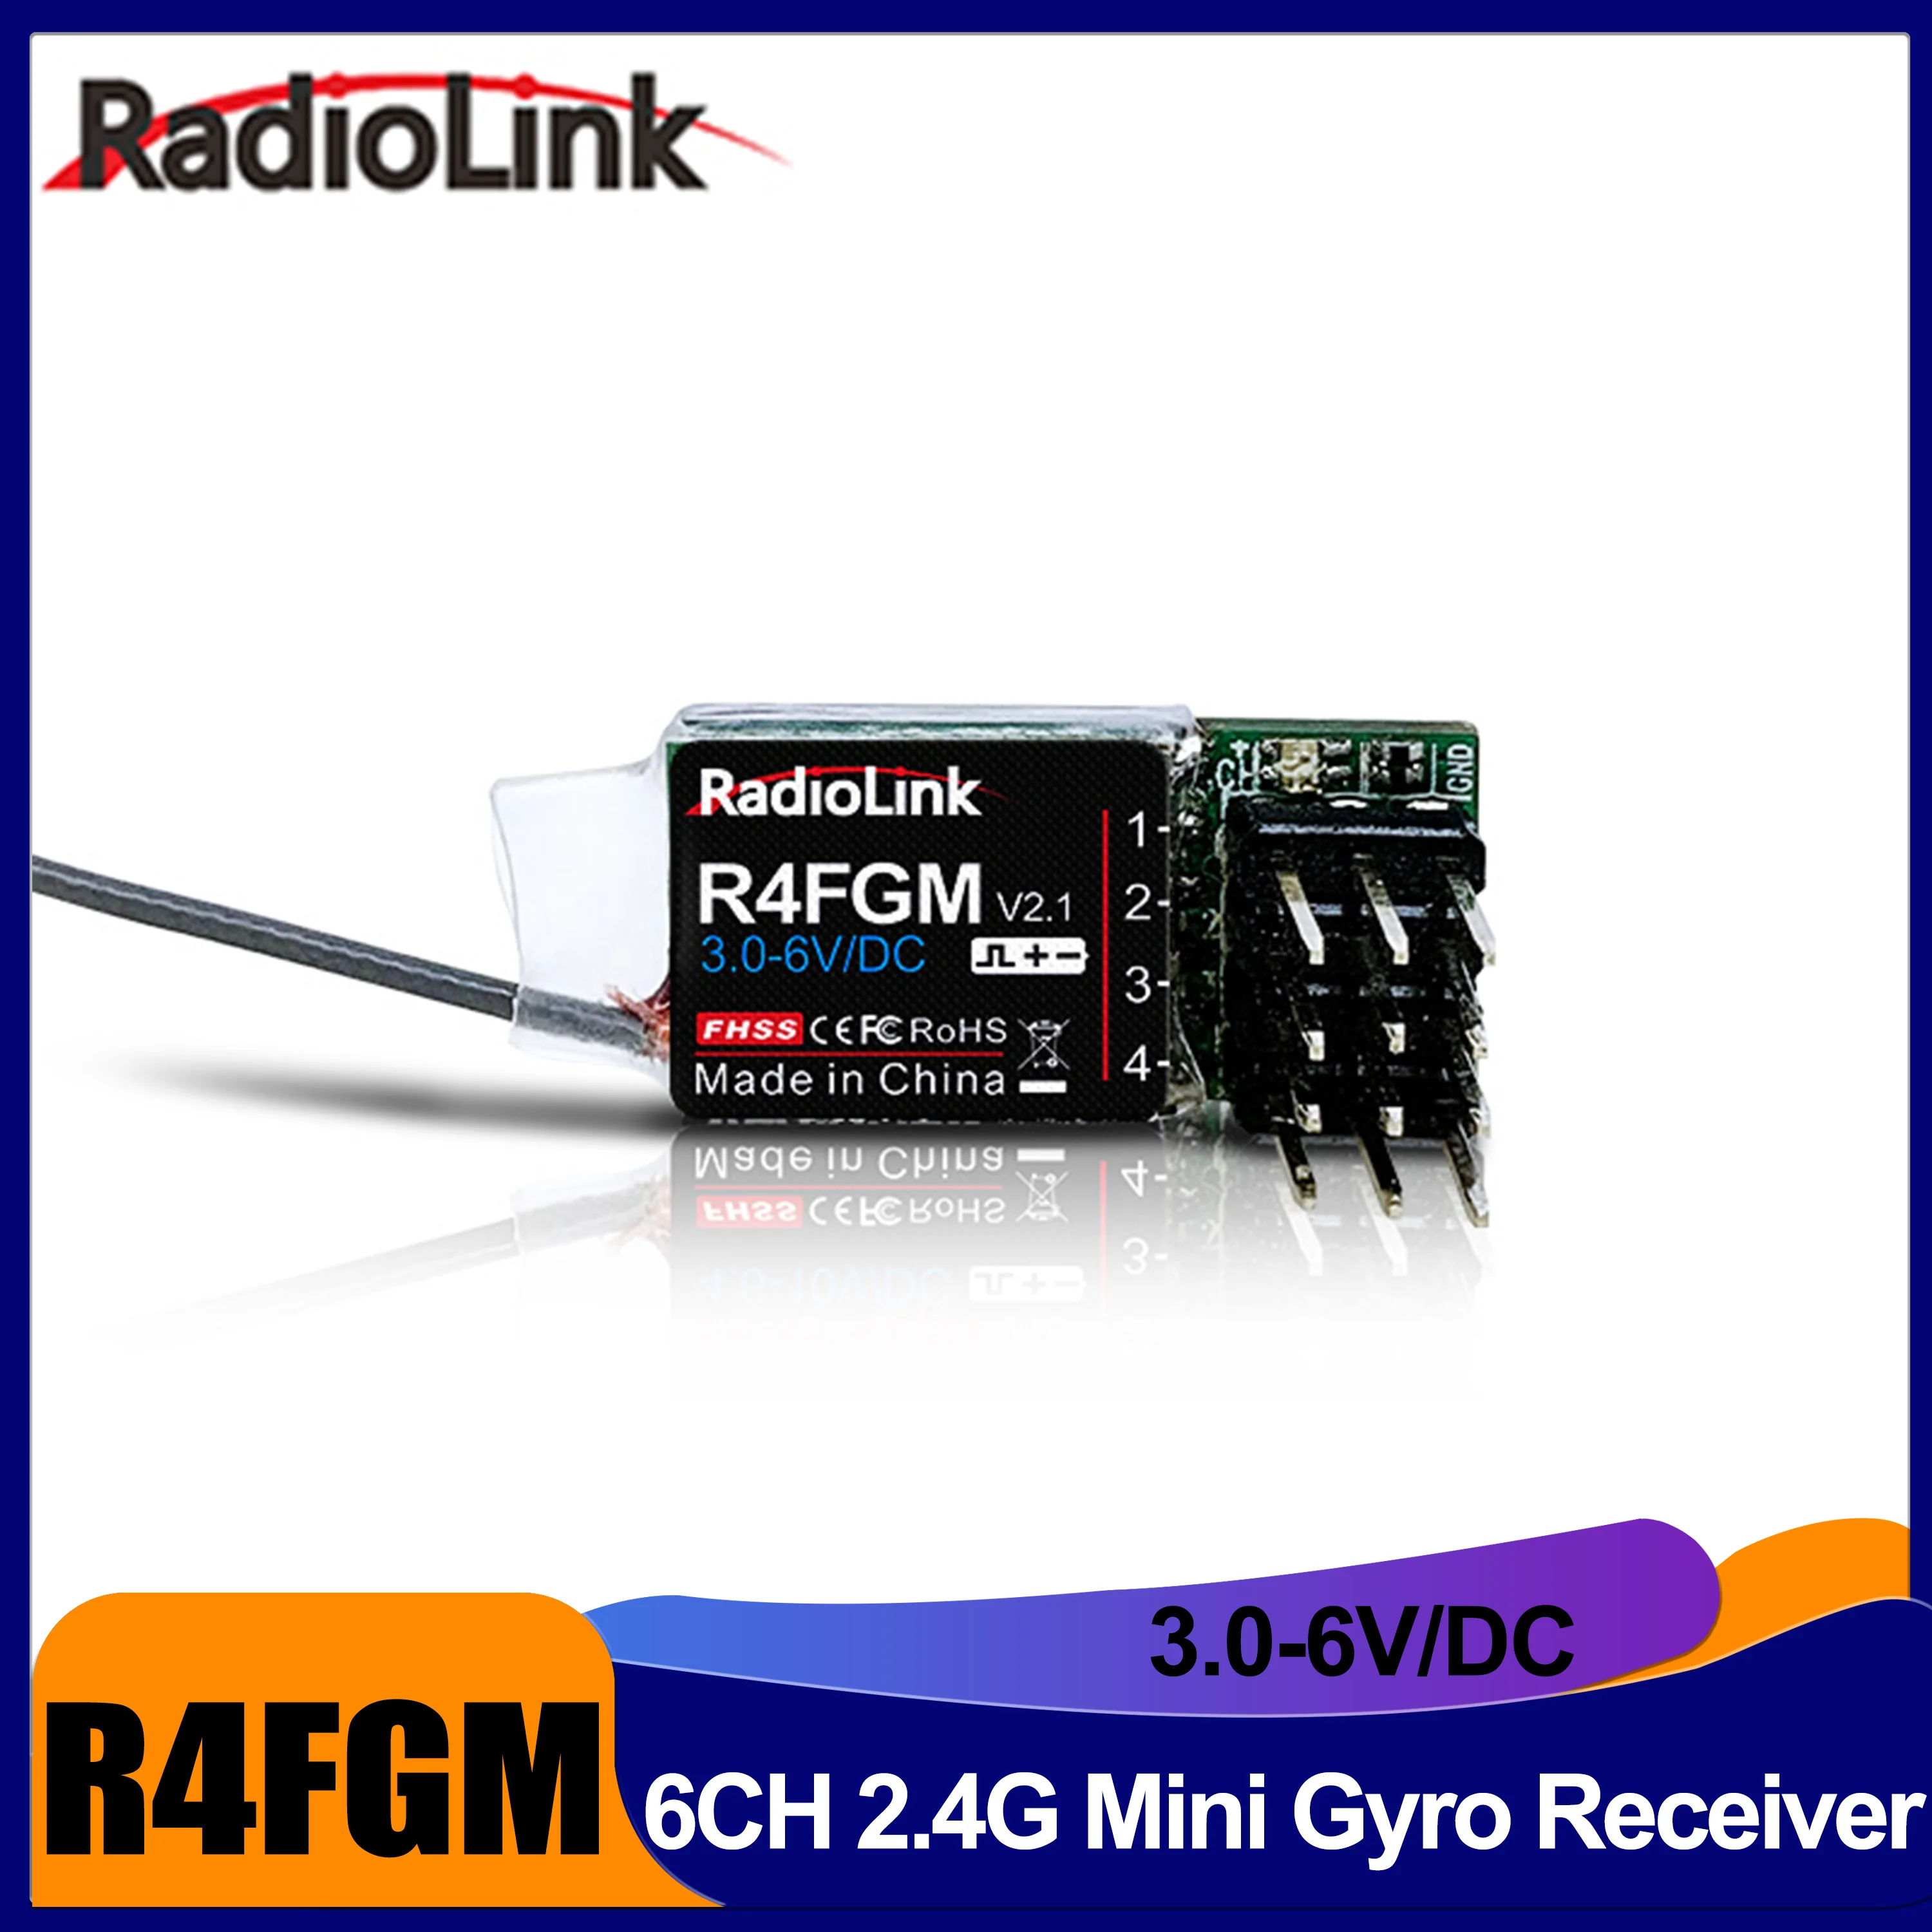 

Radiolink R4FGM V2.1 4CH Gyro 2.4G Mini Receiver for Micro RC Cars Boat Toy Airplane RC4GS/RC6GS//RC4G/T8FB/T8S/RC8X Transmitter